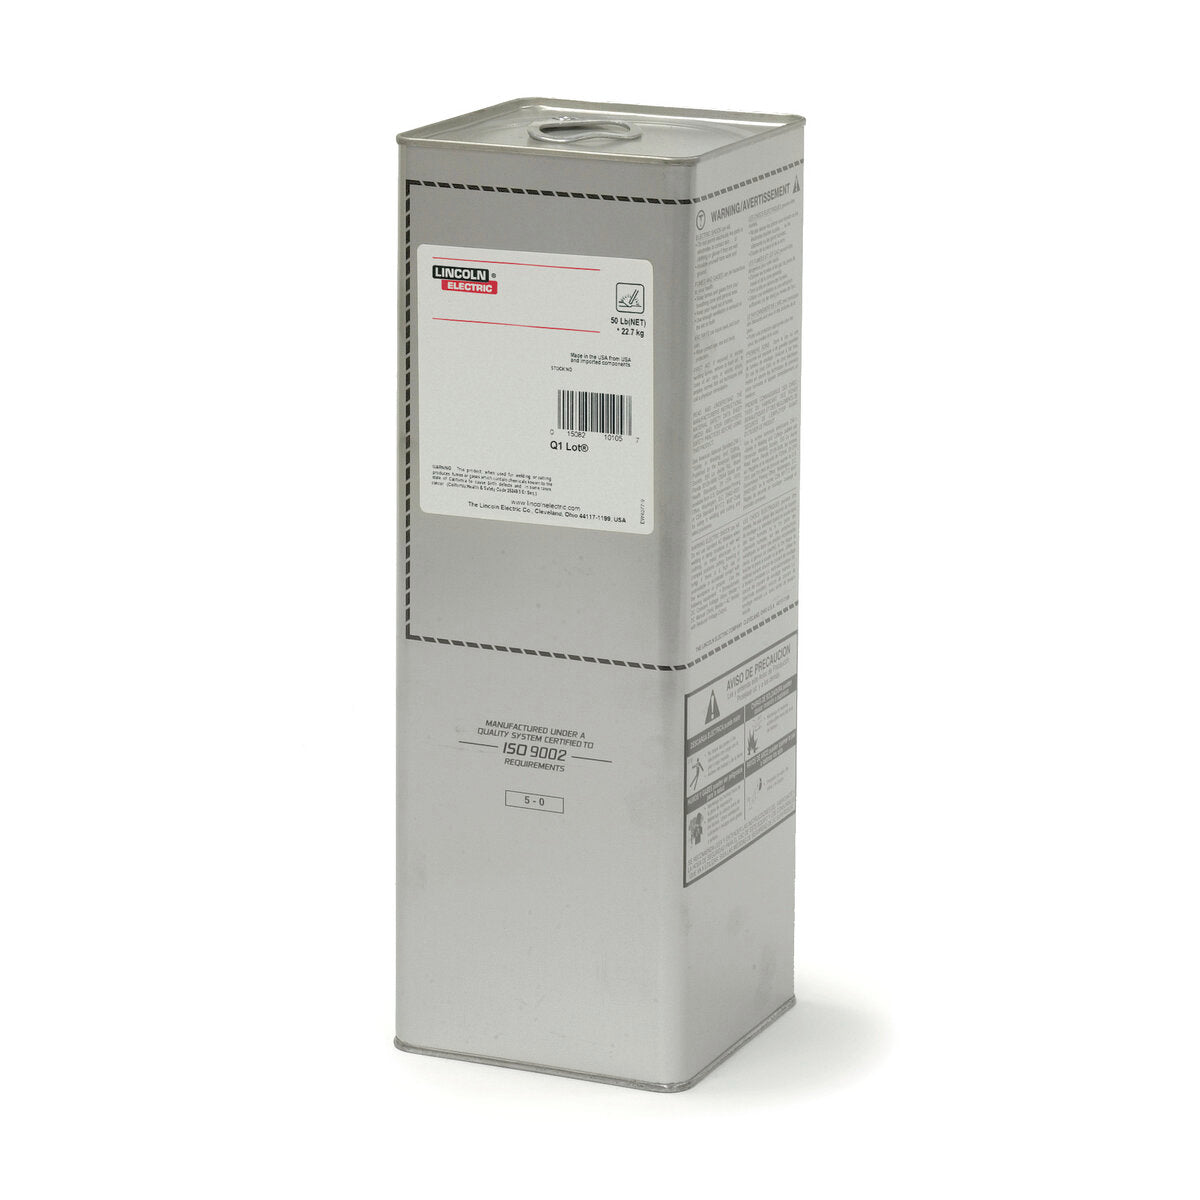 Lincoln Electric - Excalibur® 7018 MR® Stick (SMAW) Electrode, 3/32x14 in, 50 lb Easy Open Can - ED033868